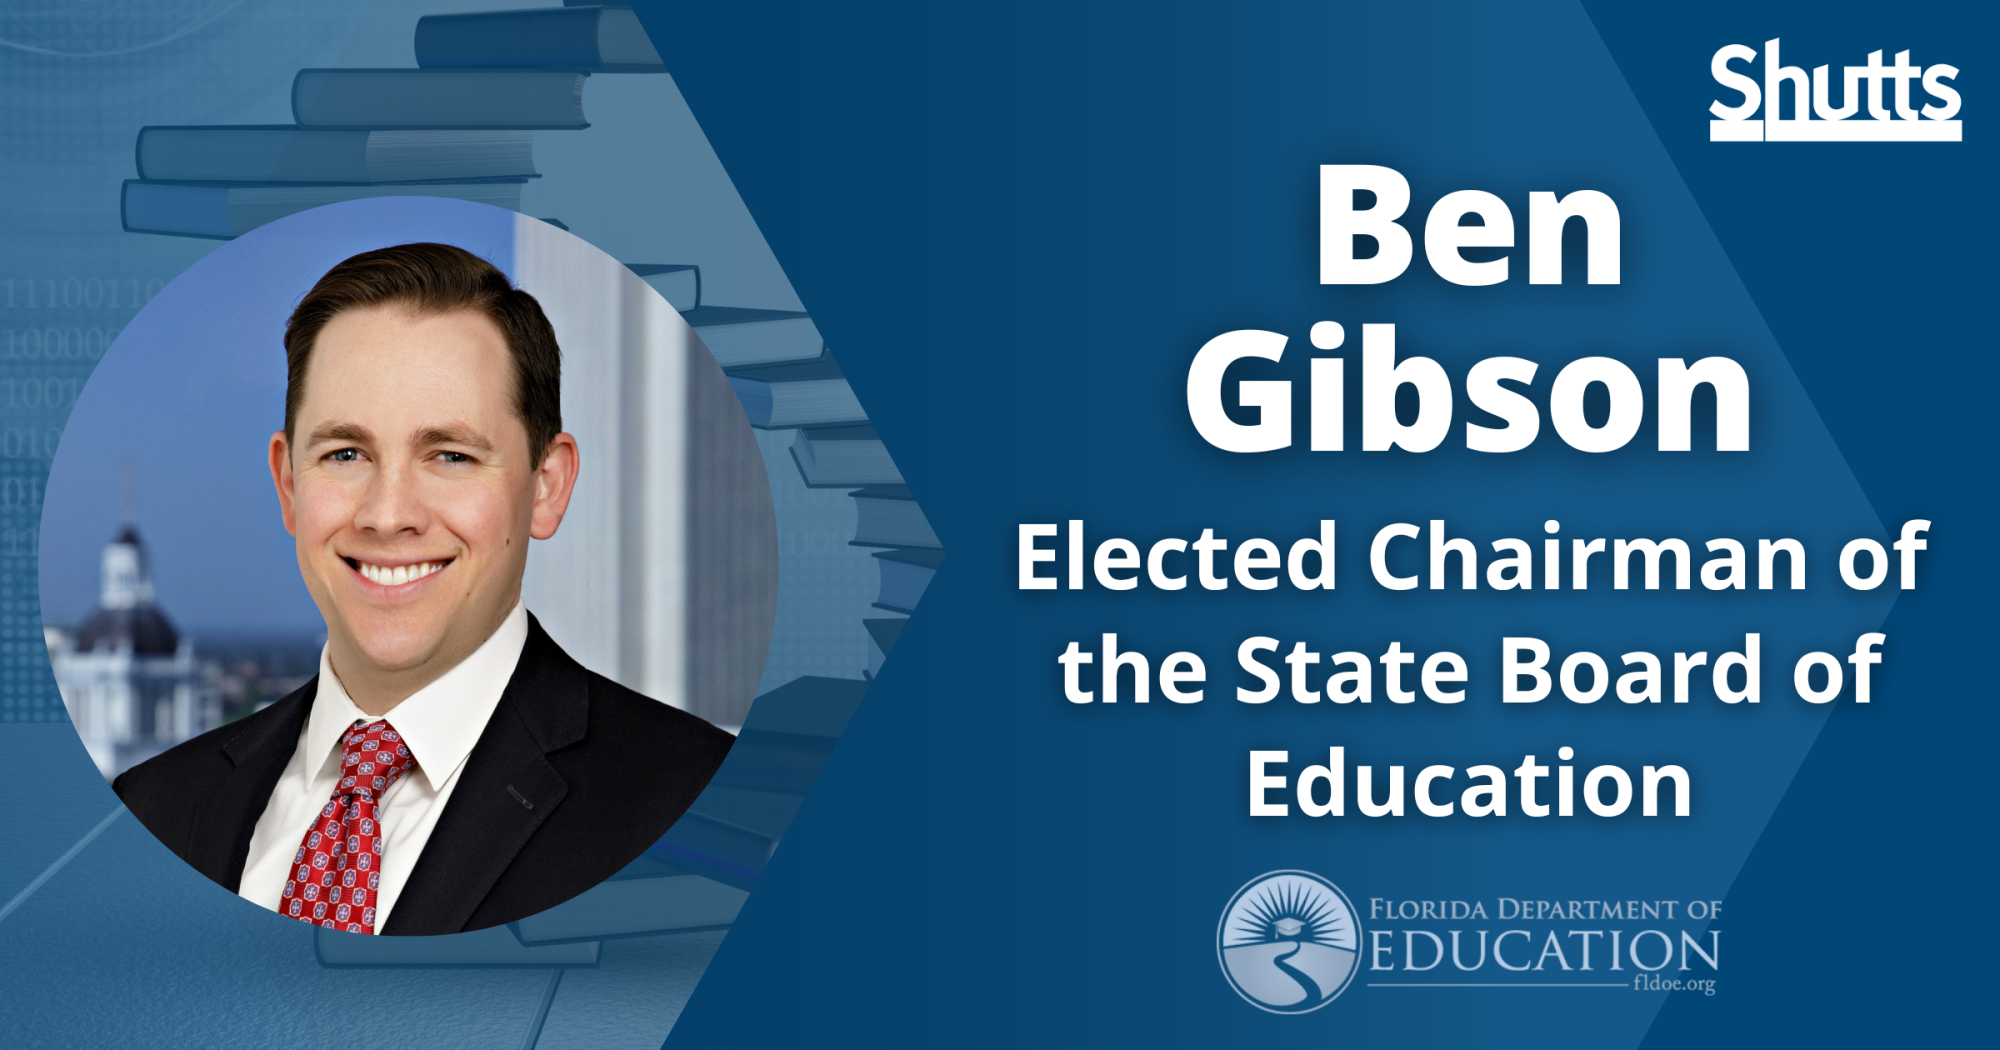 Ben Gibson Elected Chairman of the State Board of Education